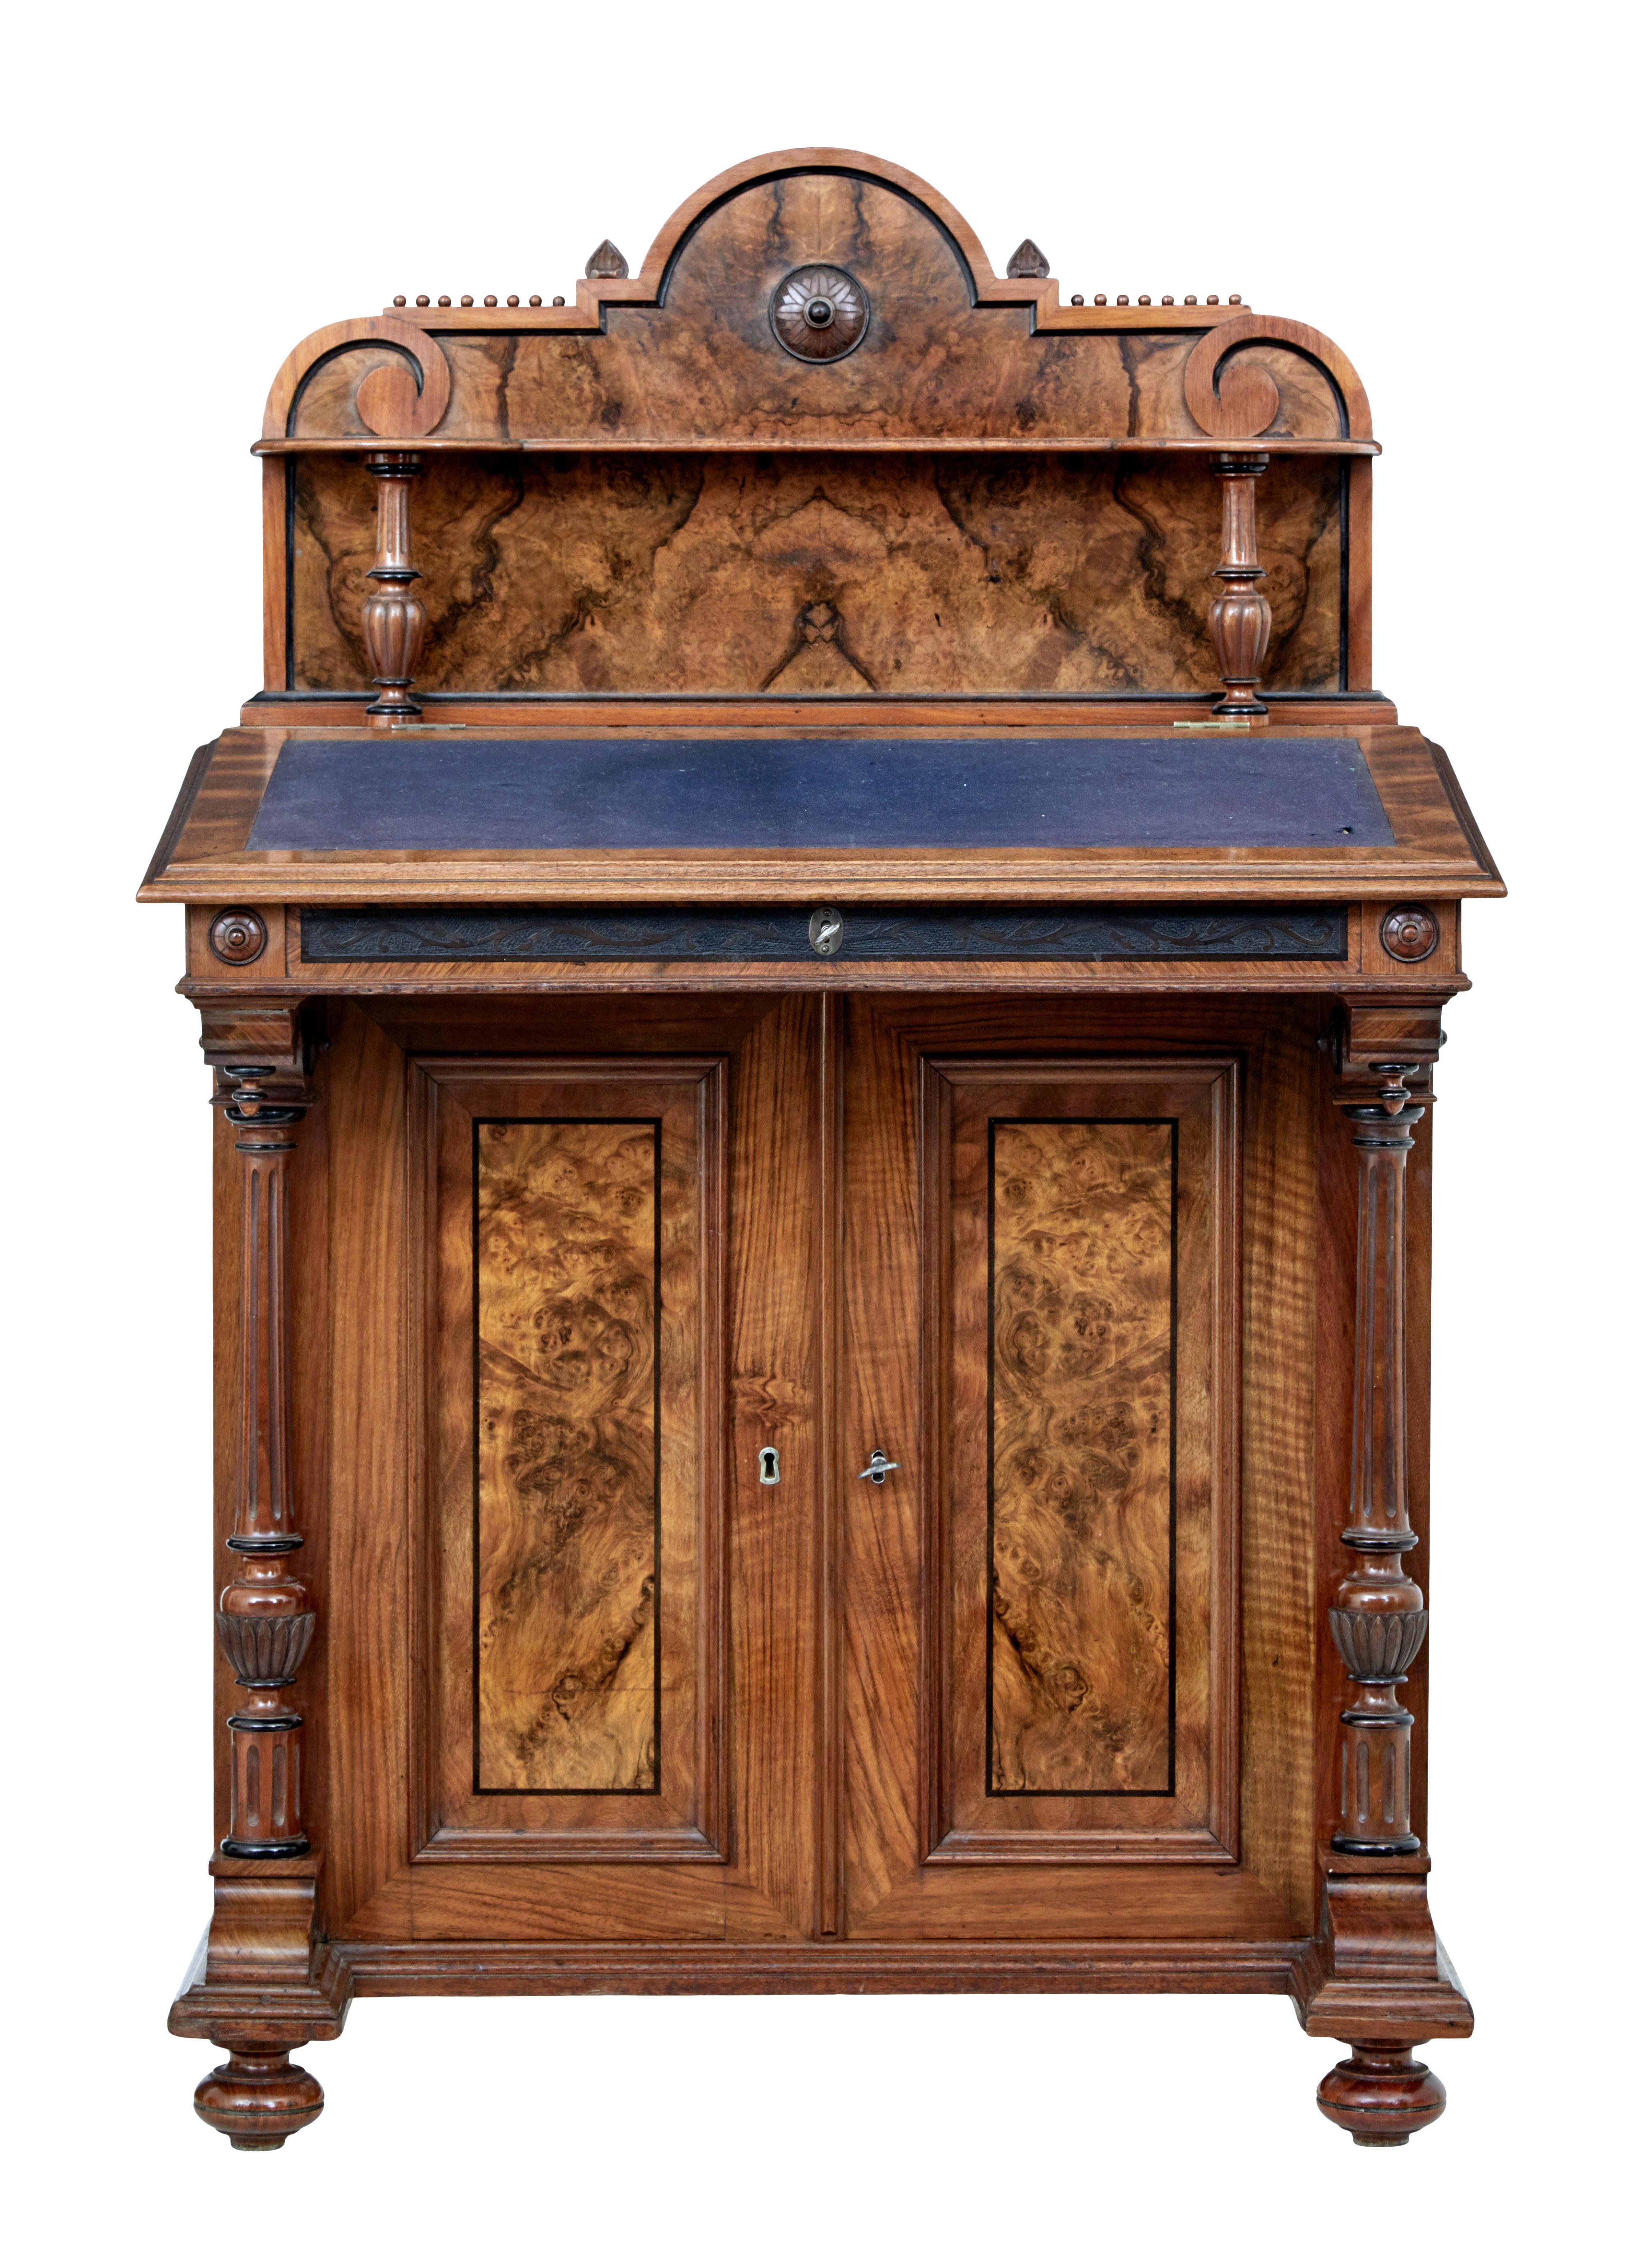 19th century burr walnut davenport writing desk, circa 1890.

Fine quality Victorian davenport made in burr walnut and decorated with ebony stringing.

Decorative back with carved scrolls and beading, forming the back drop to a shelf with turned